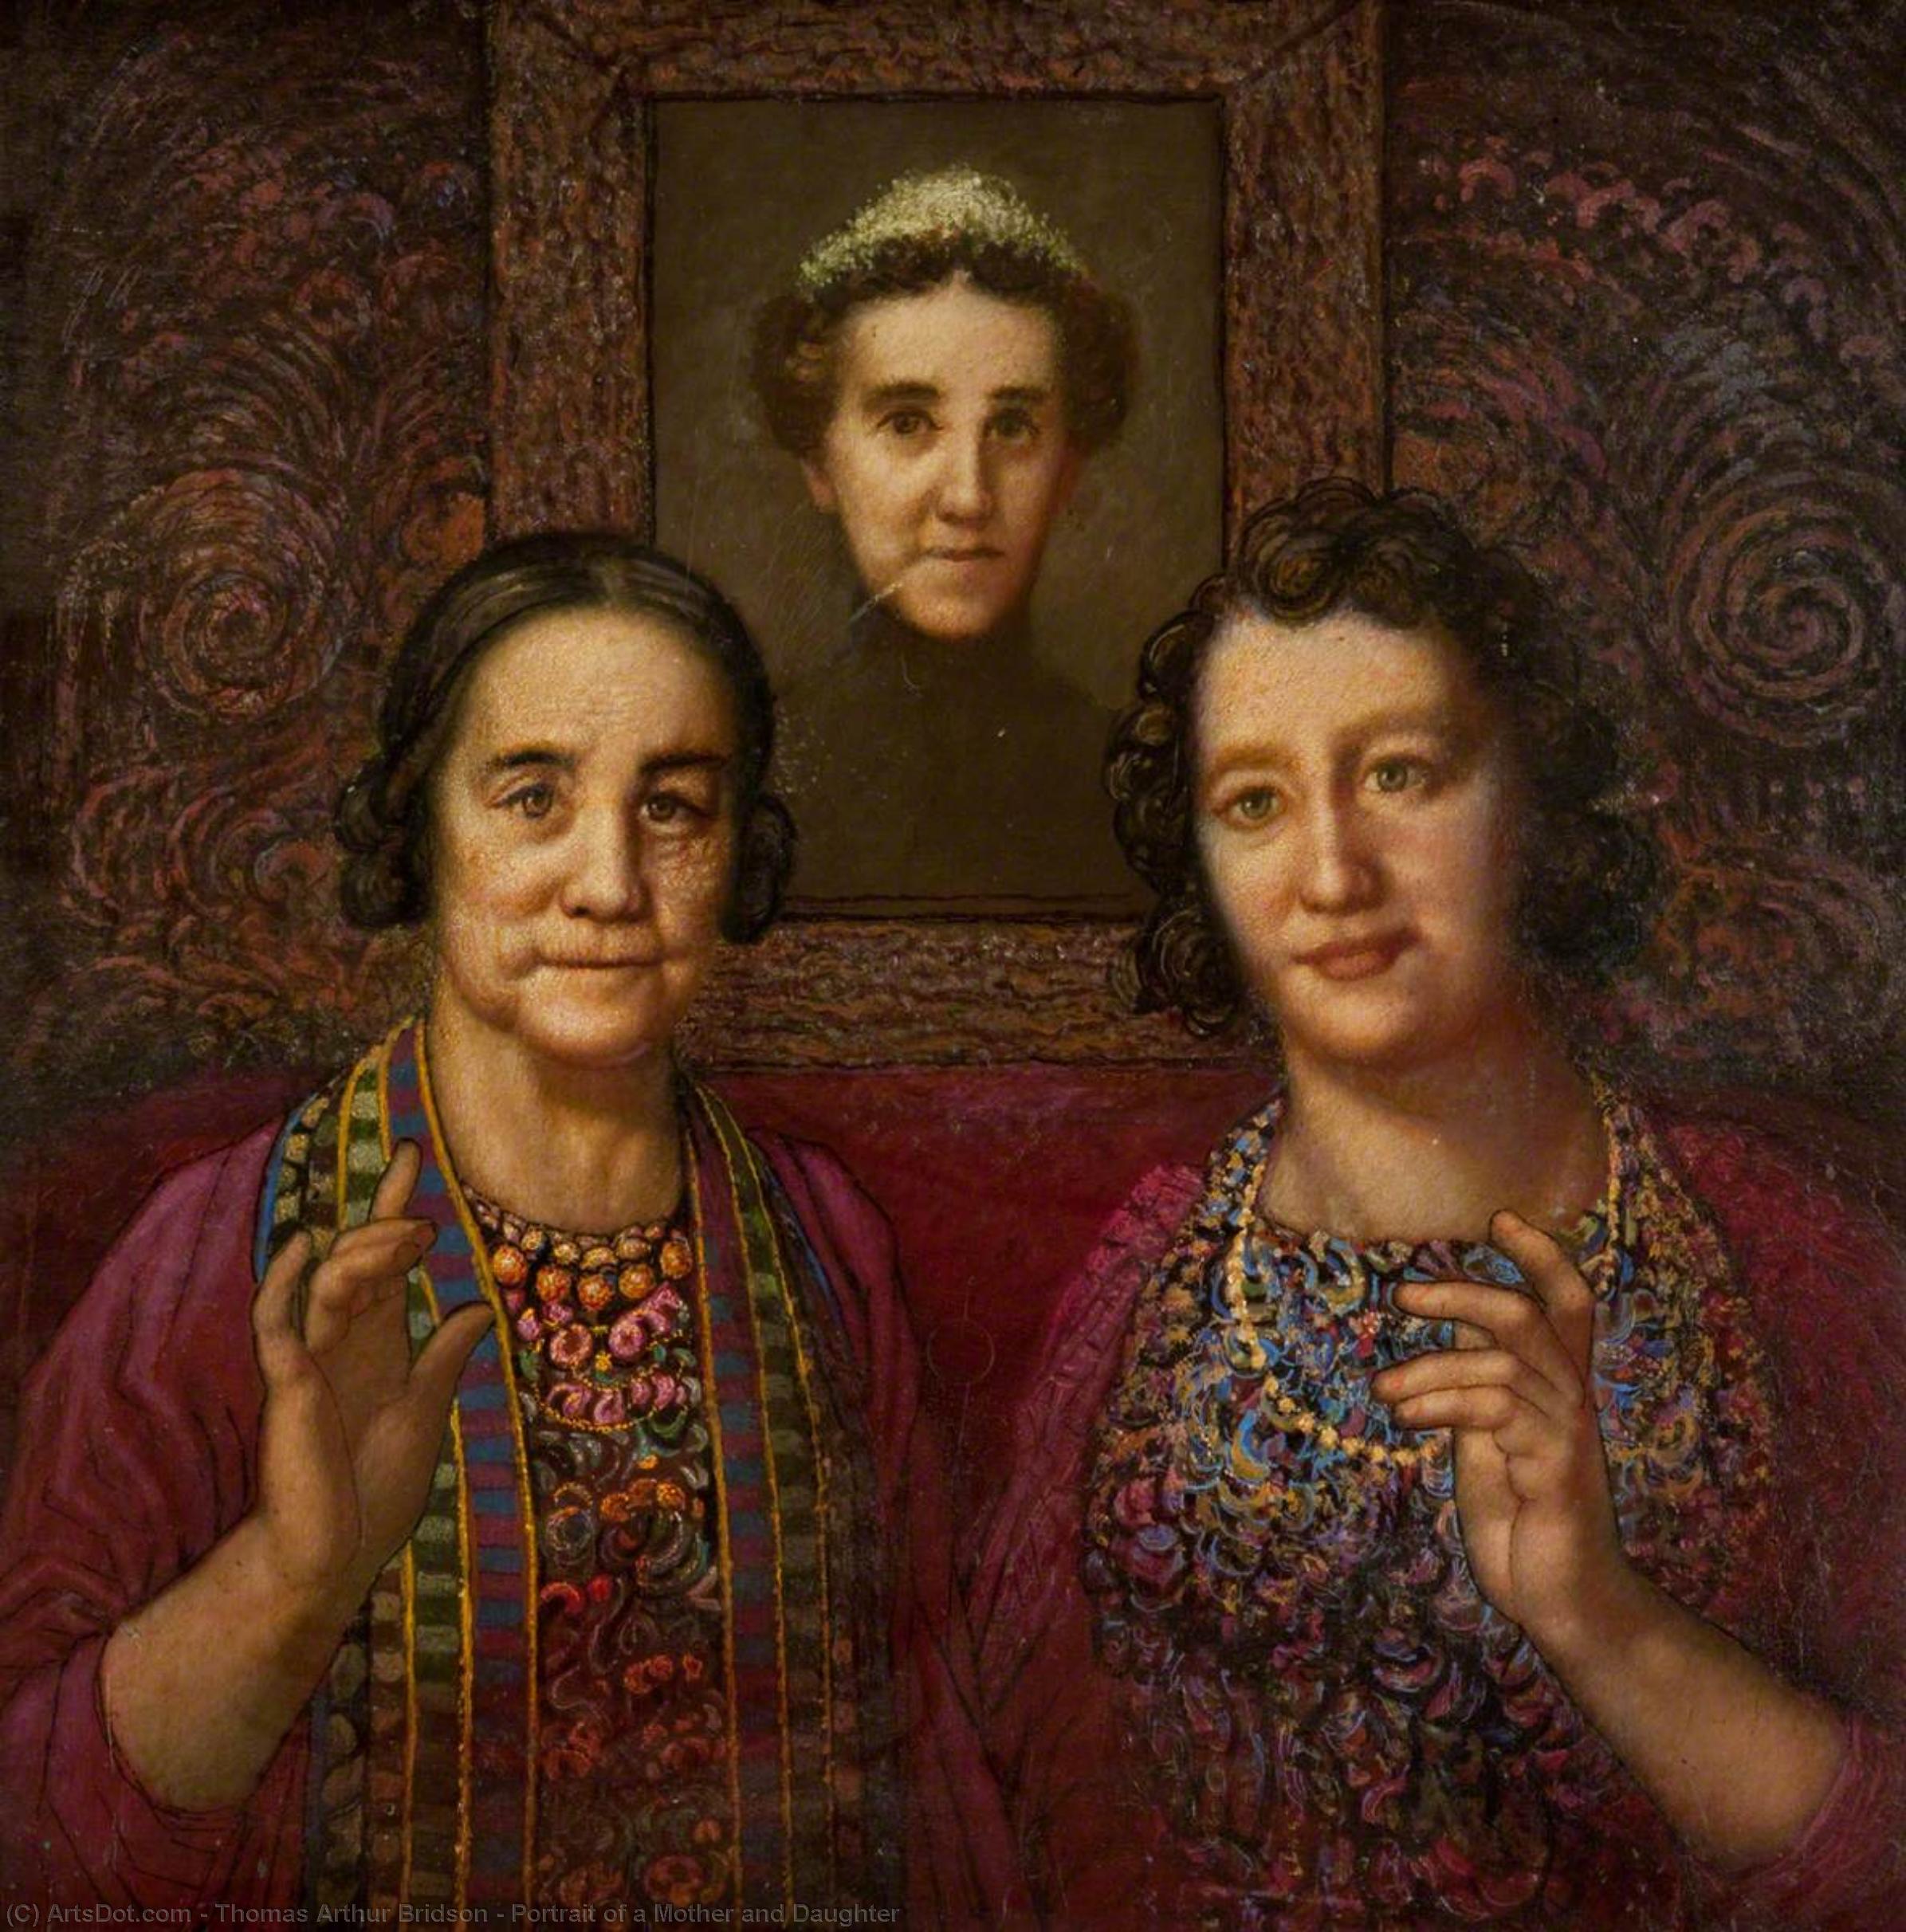 Buy Museum Art Reproductions Portrait of a Mother and Daughter by Thomas Arthur Bridson (Inspired By) (1860-1966) | ArtsDot.com